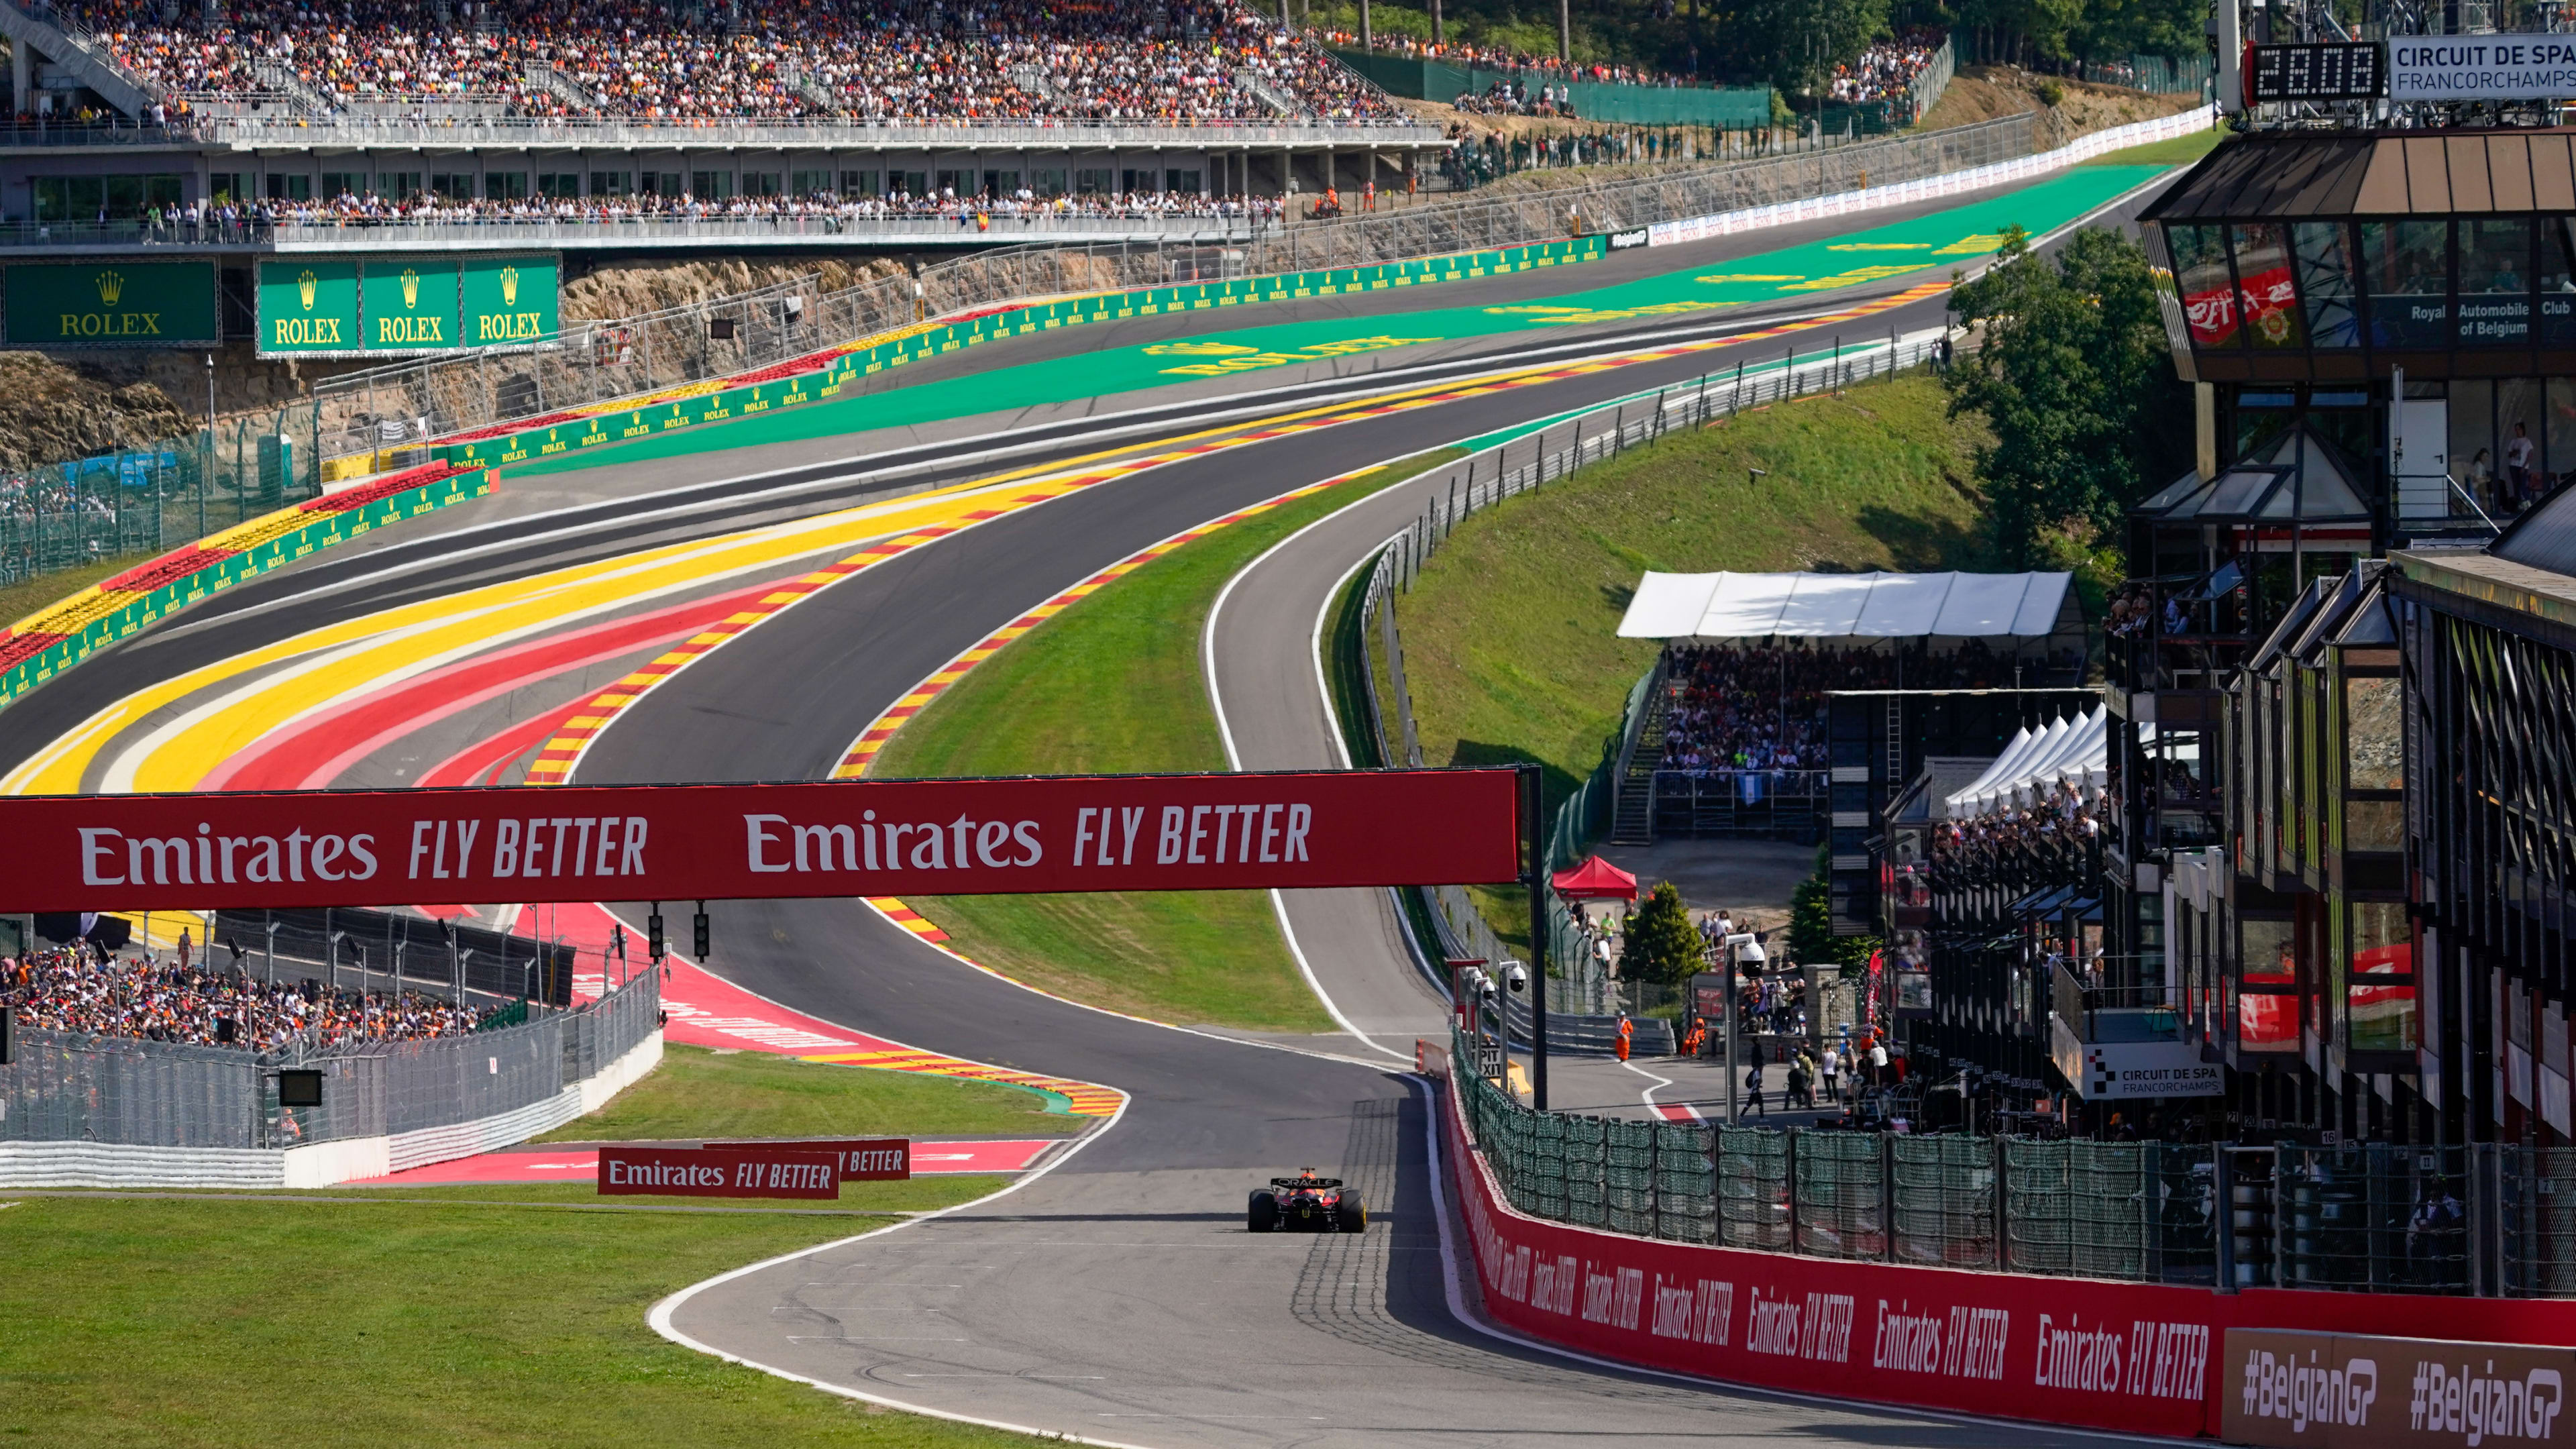 ITS RACE WEEK 5 storylines were excited about ahead of the 2023 Belgian Grand Prix Formula 1®